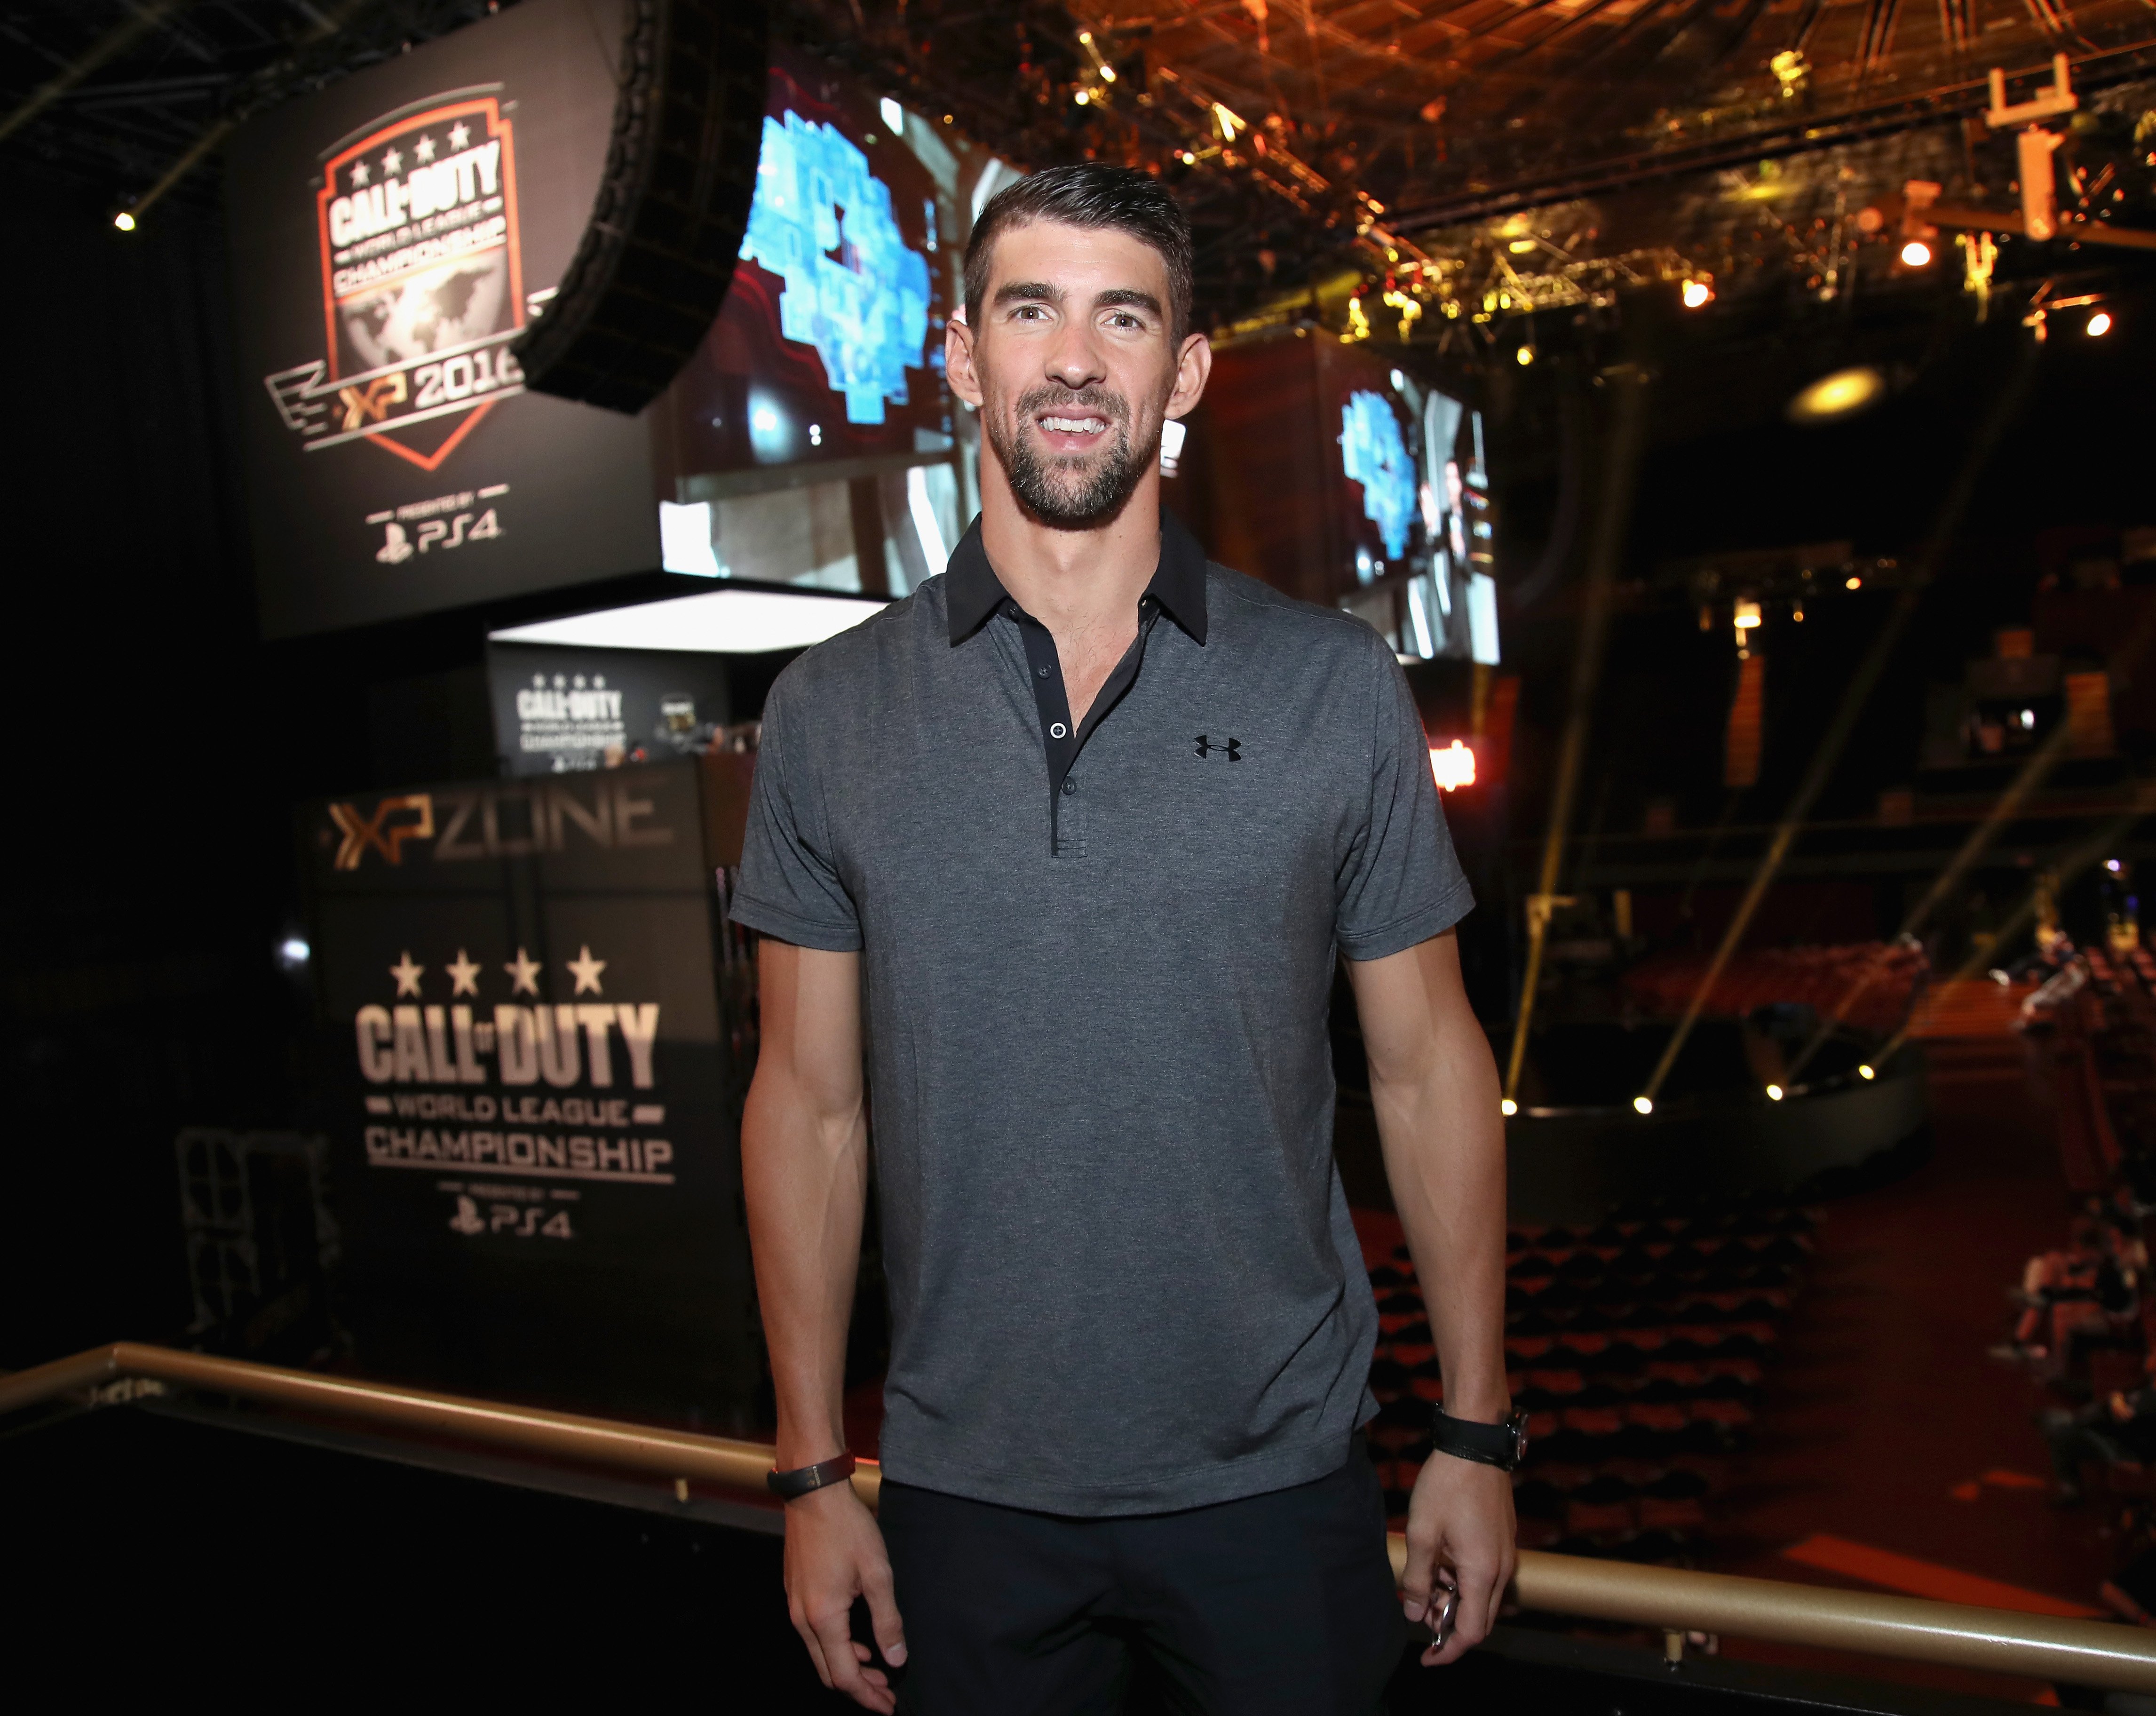 Michael Phelps attends The Ultimate Fan Experience, Call Of Duty XP 2016 presented by Activision at The Forum on September 2, 2016 in Inglewood, California. | Photo: Getty Images